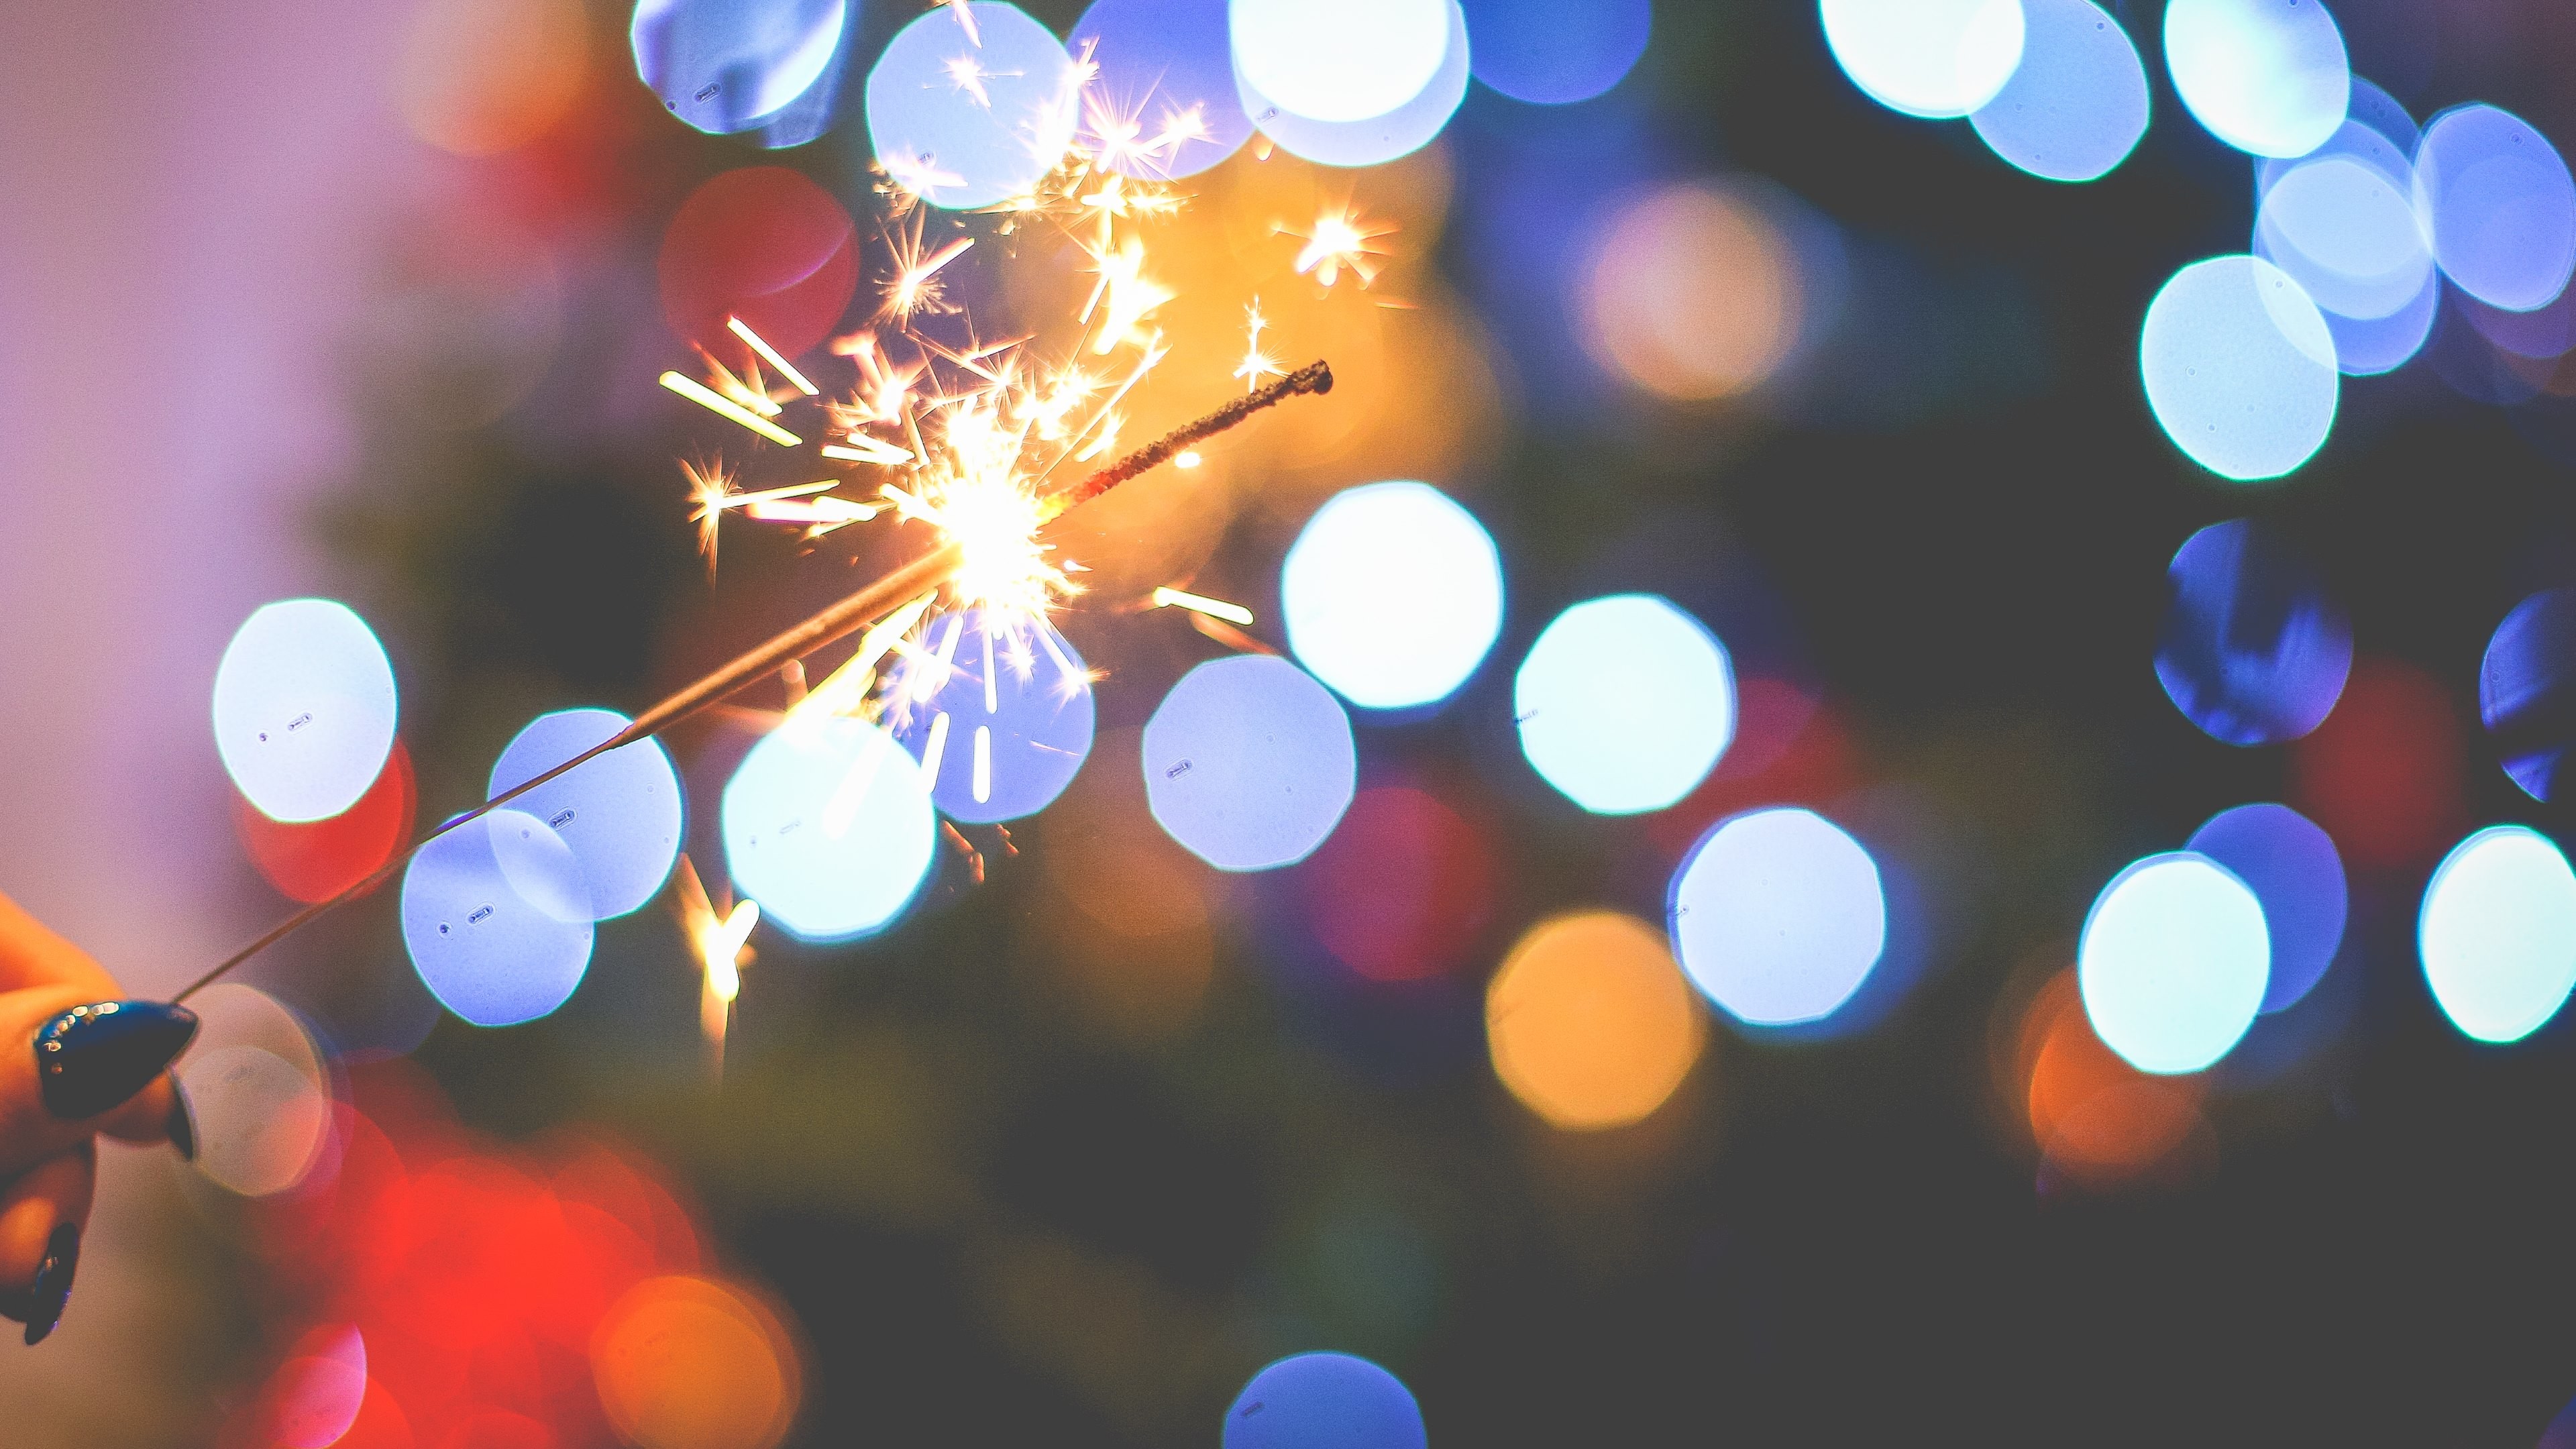 3840x2160 Wallpaper: Sparklers in the New Years Eve